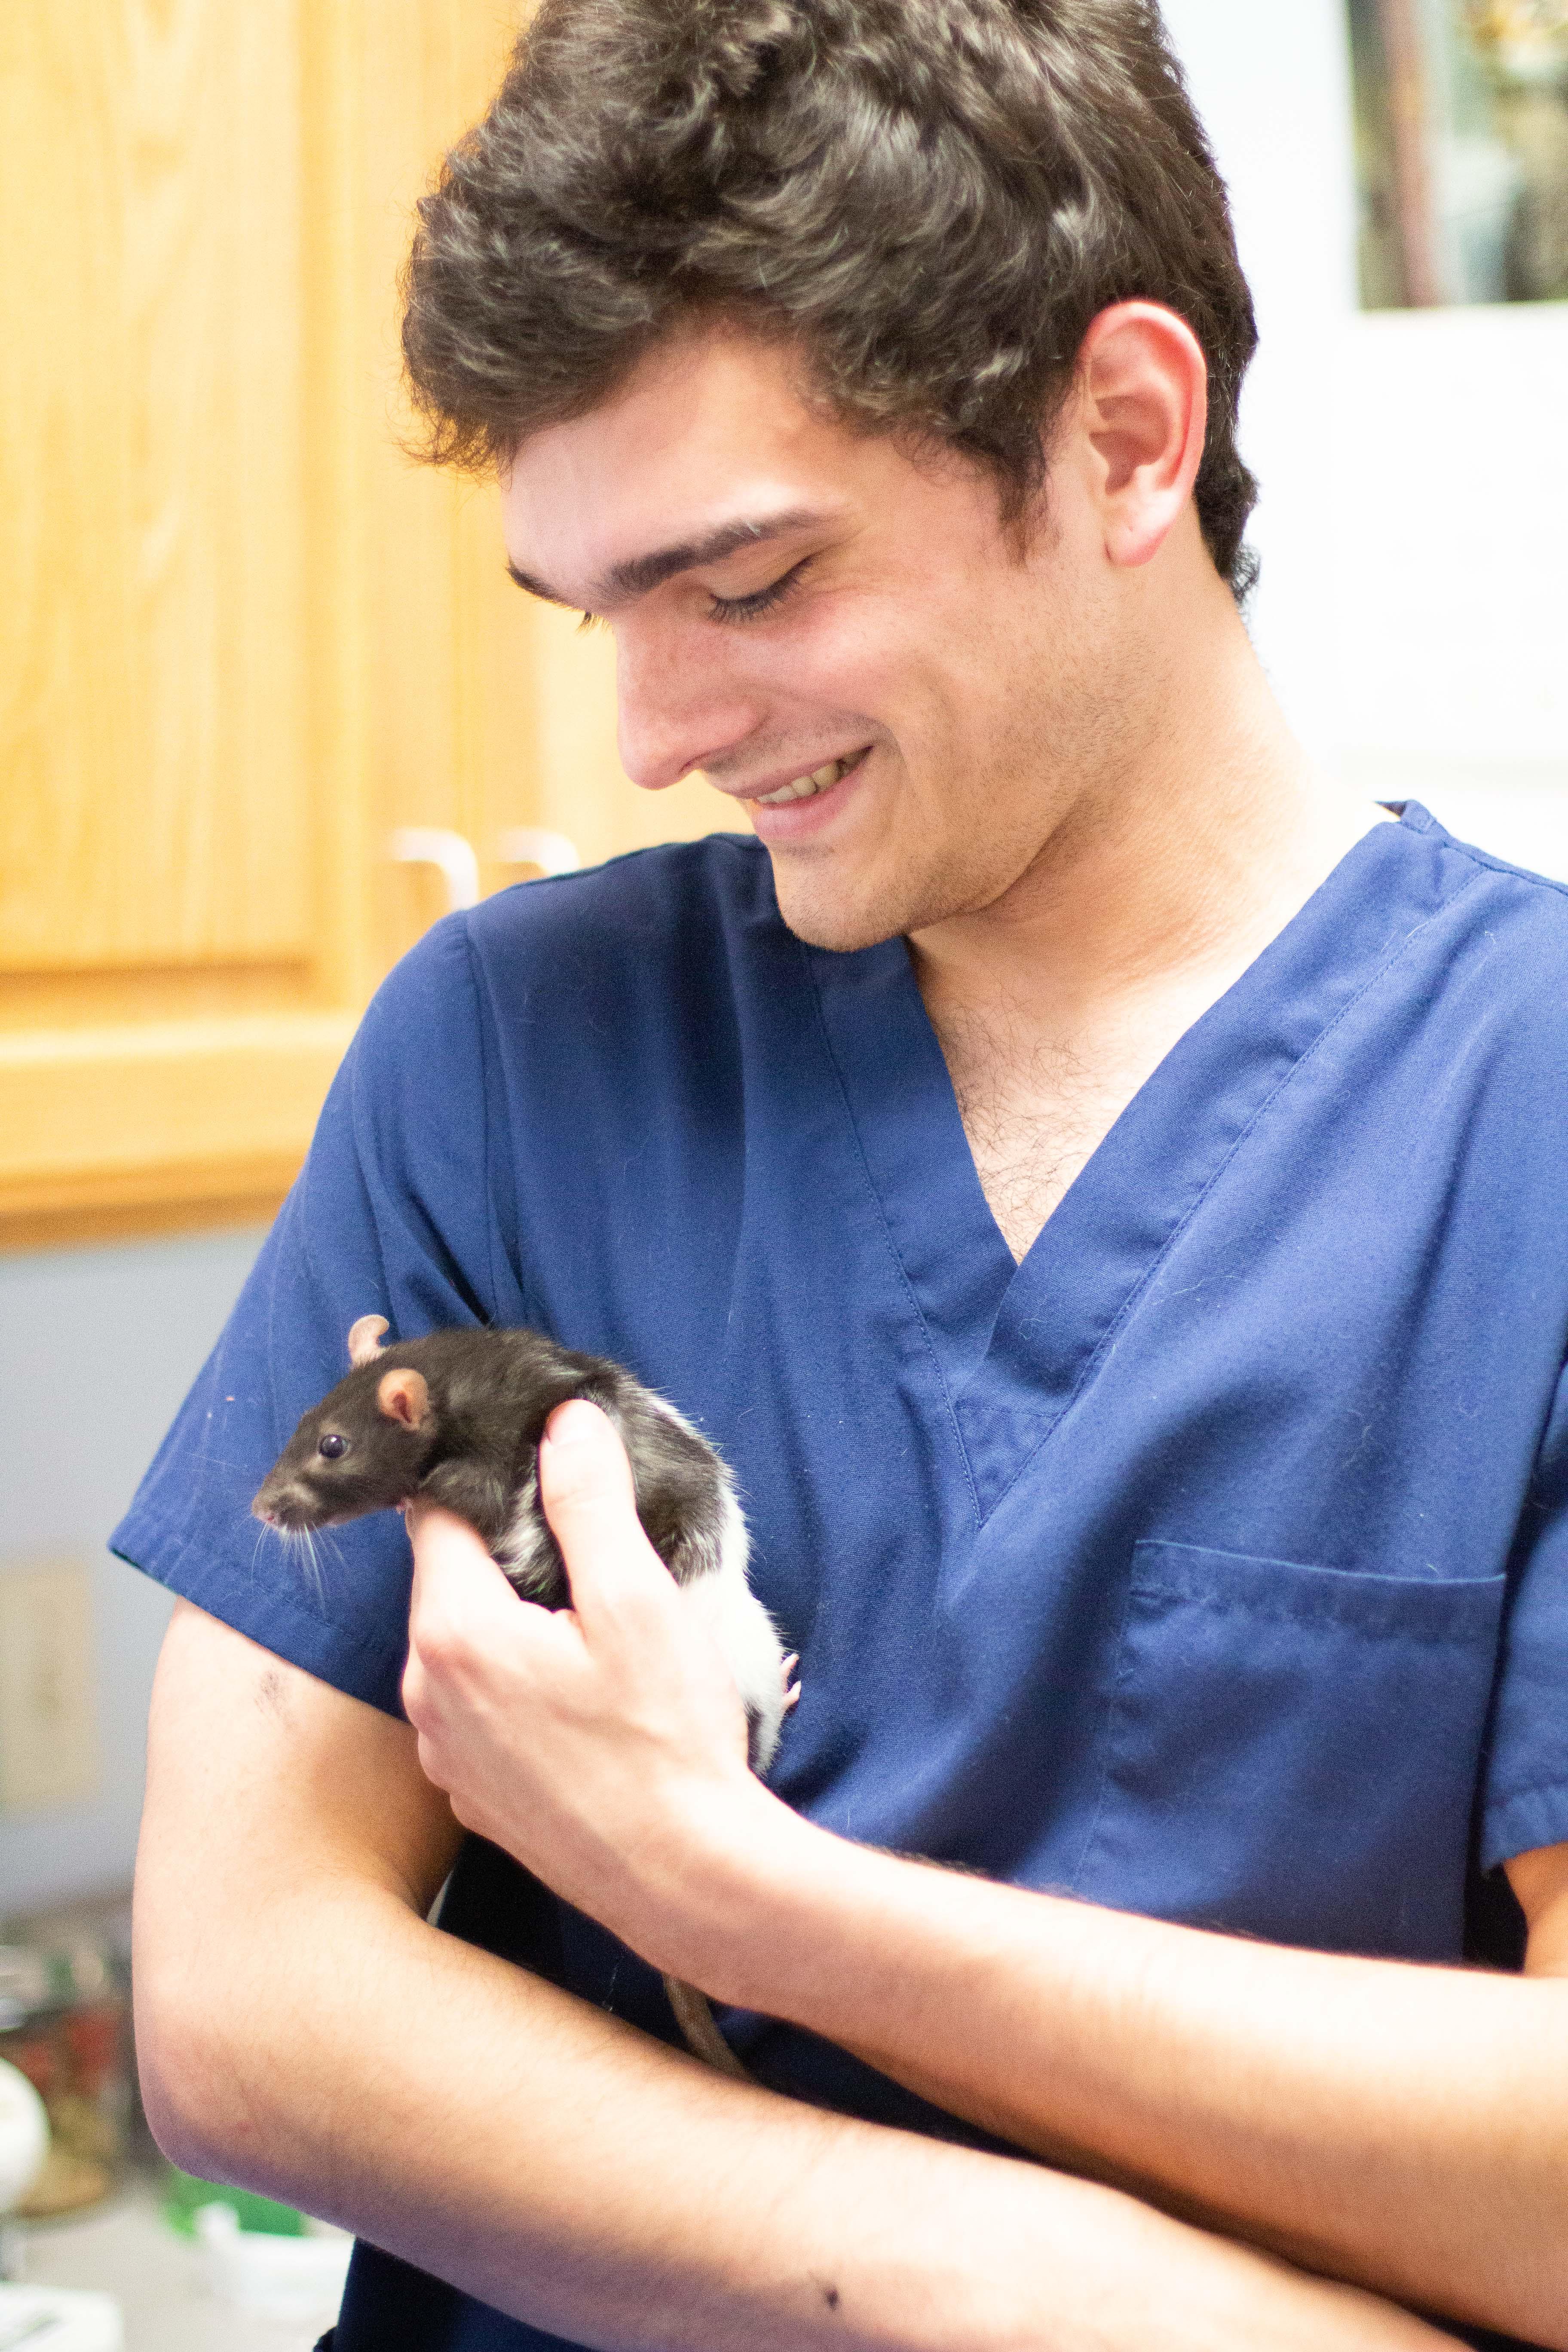 Even our smallest patients get in on the technician cuddles!